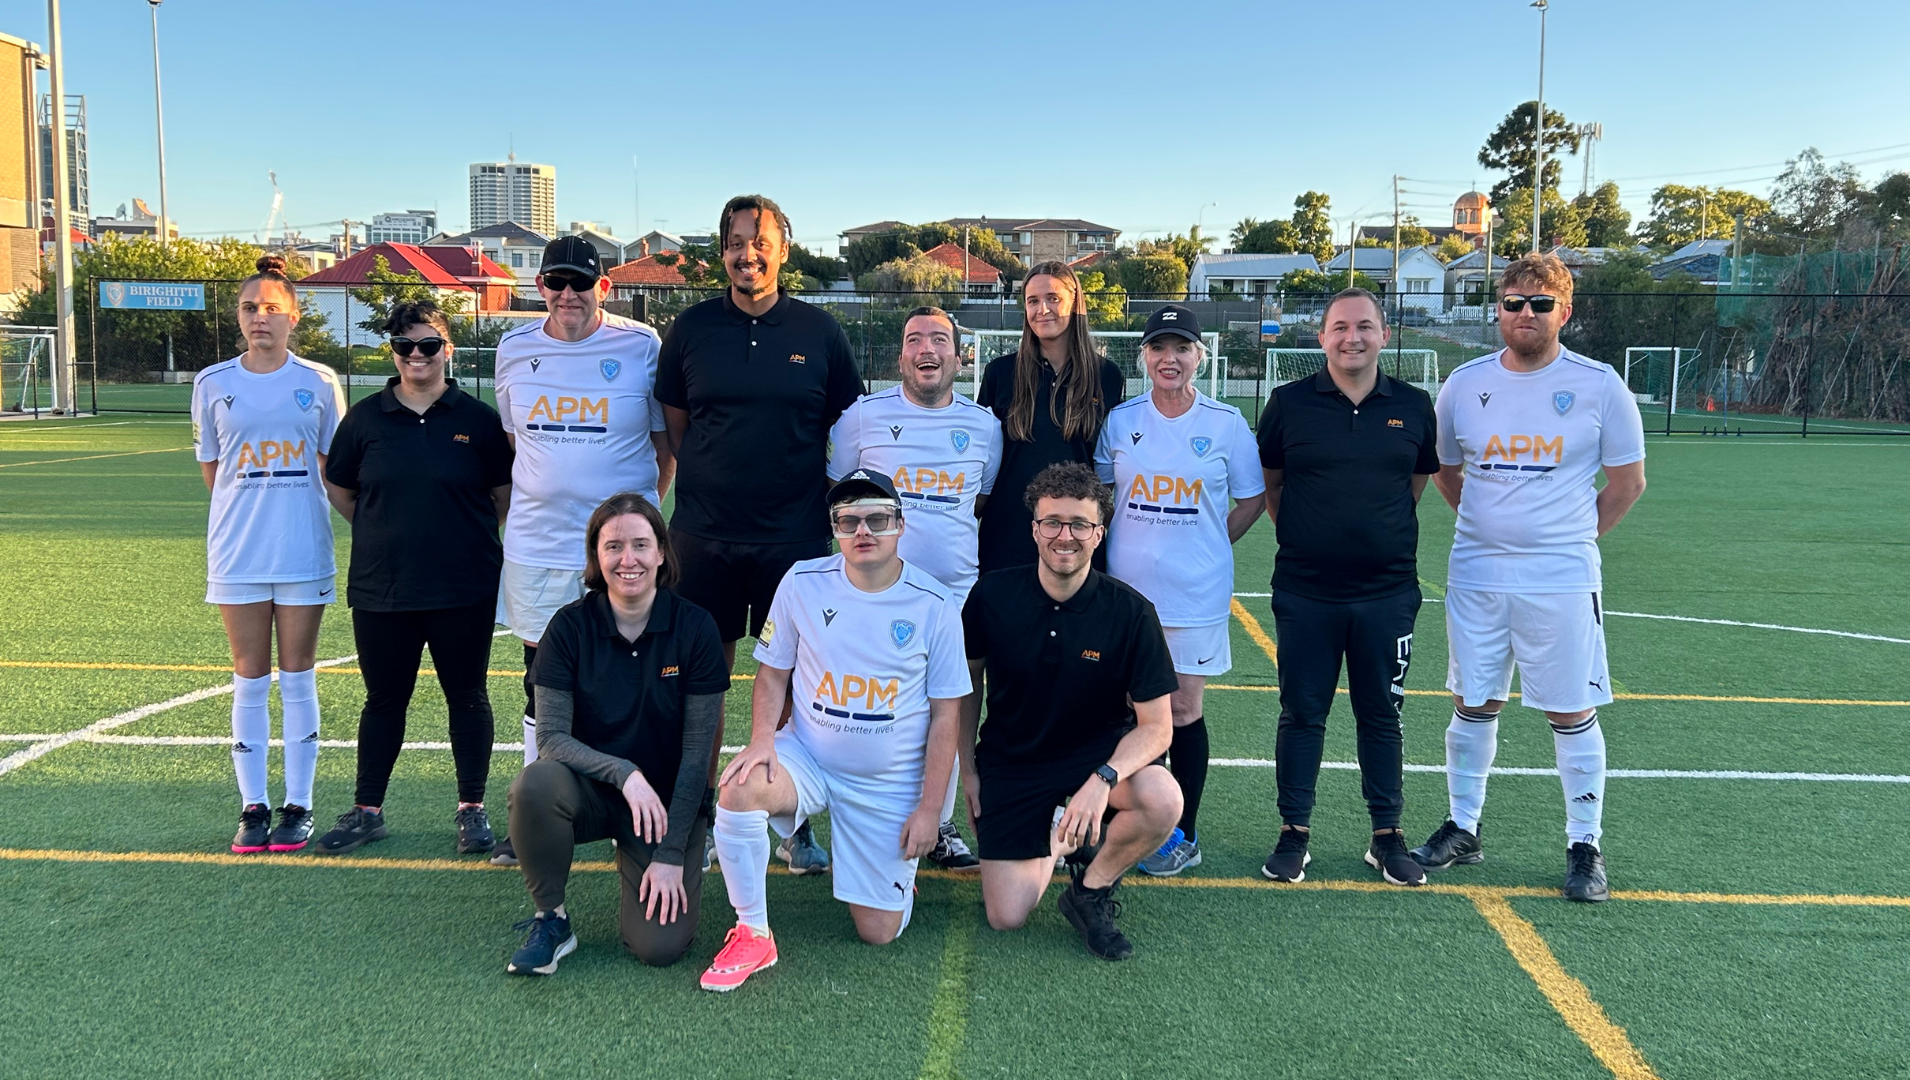 Members of the Perth Soccer Club blind soccer team and APM staff